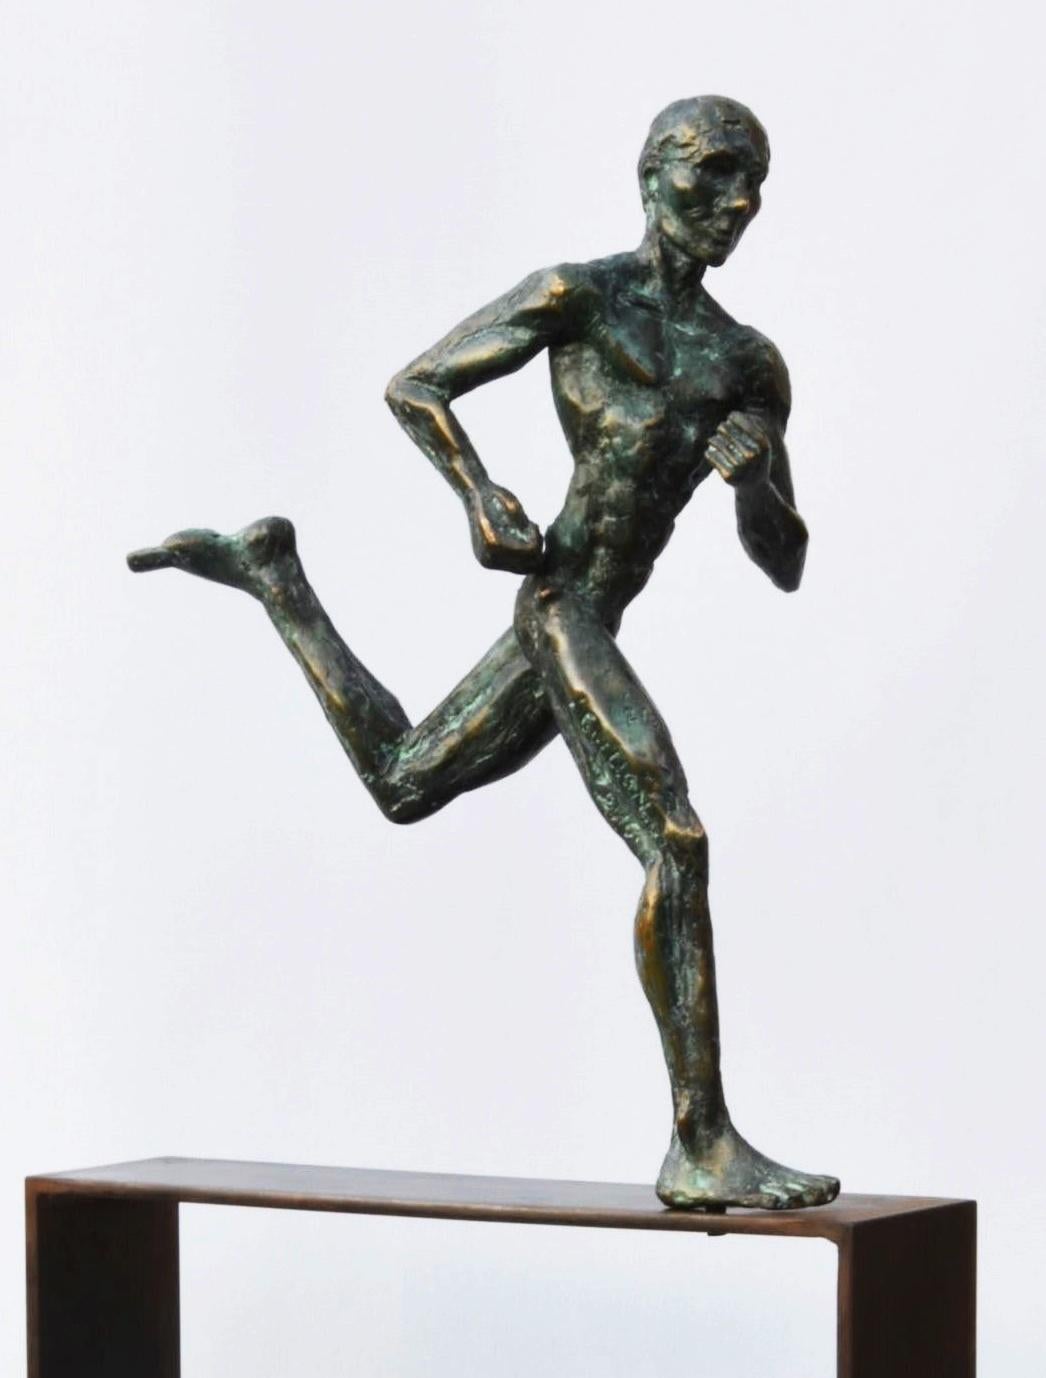 Marathon Runner is a bronze sculpture by contemporary artist Yann Guillon, dimensions are 34 × 23 × 10 cm (13.4 × 9.1 × 3.9 in). Dimensions of the base are 30 x 30 cm (11.8 x 11.8 in), height of the sculpture with the metal base: 64 cm (25.1 in).